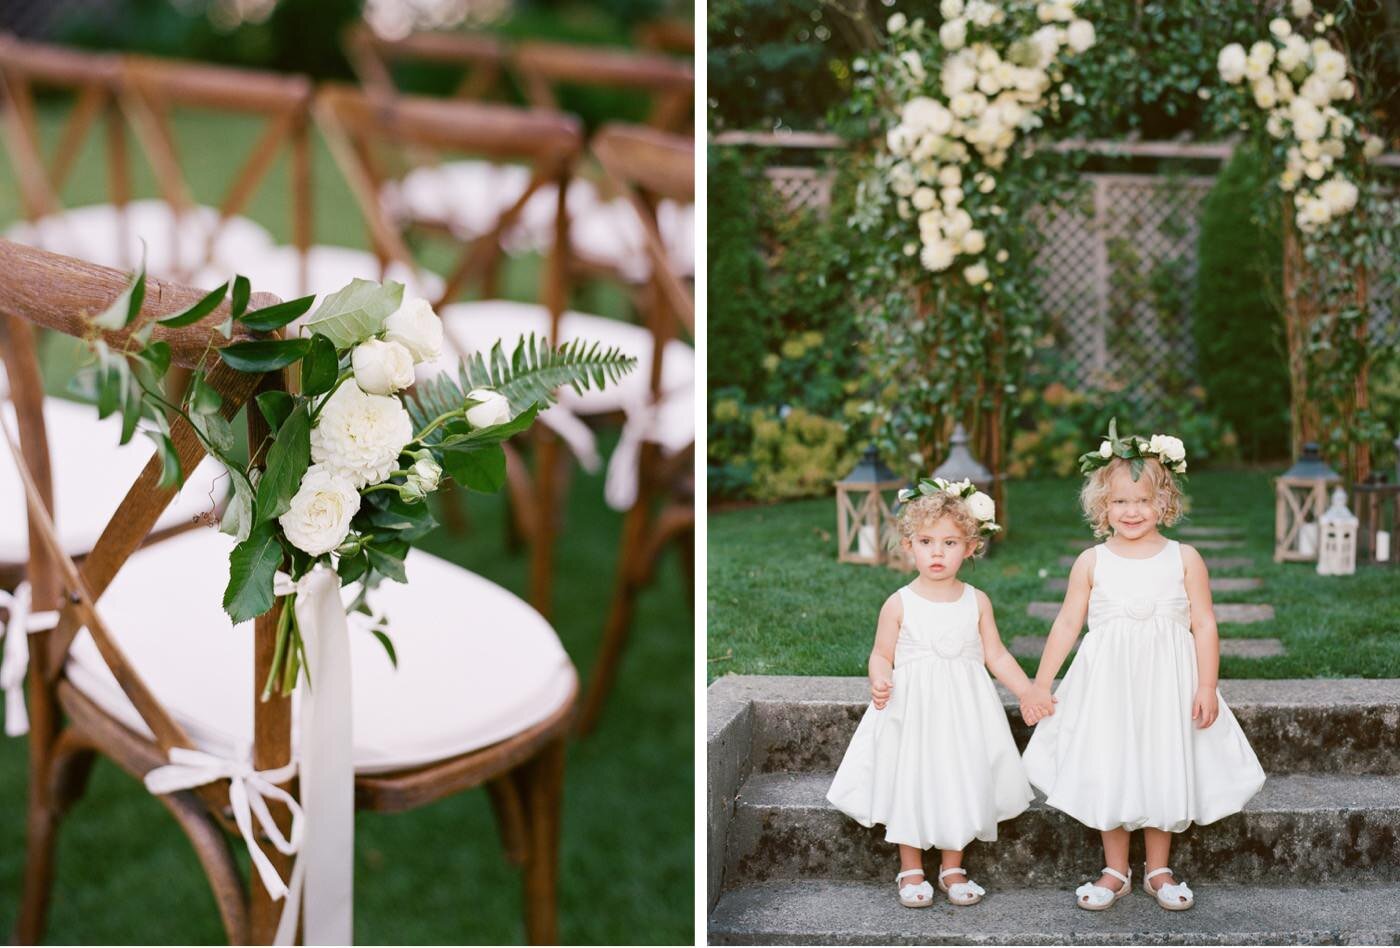 Flowergirls with flower crowns pose in front of a lush white and green ceremony arch